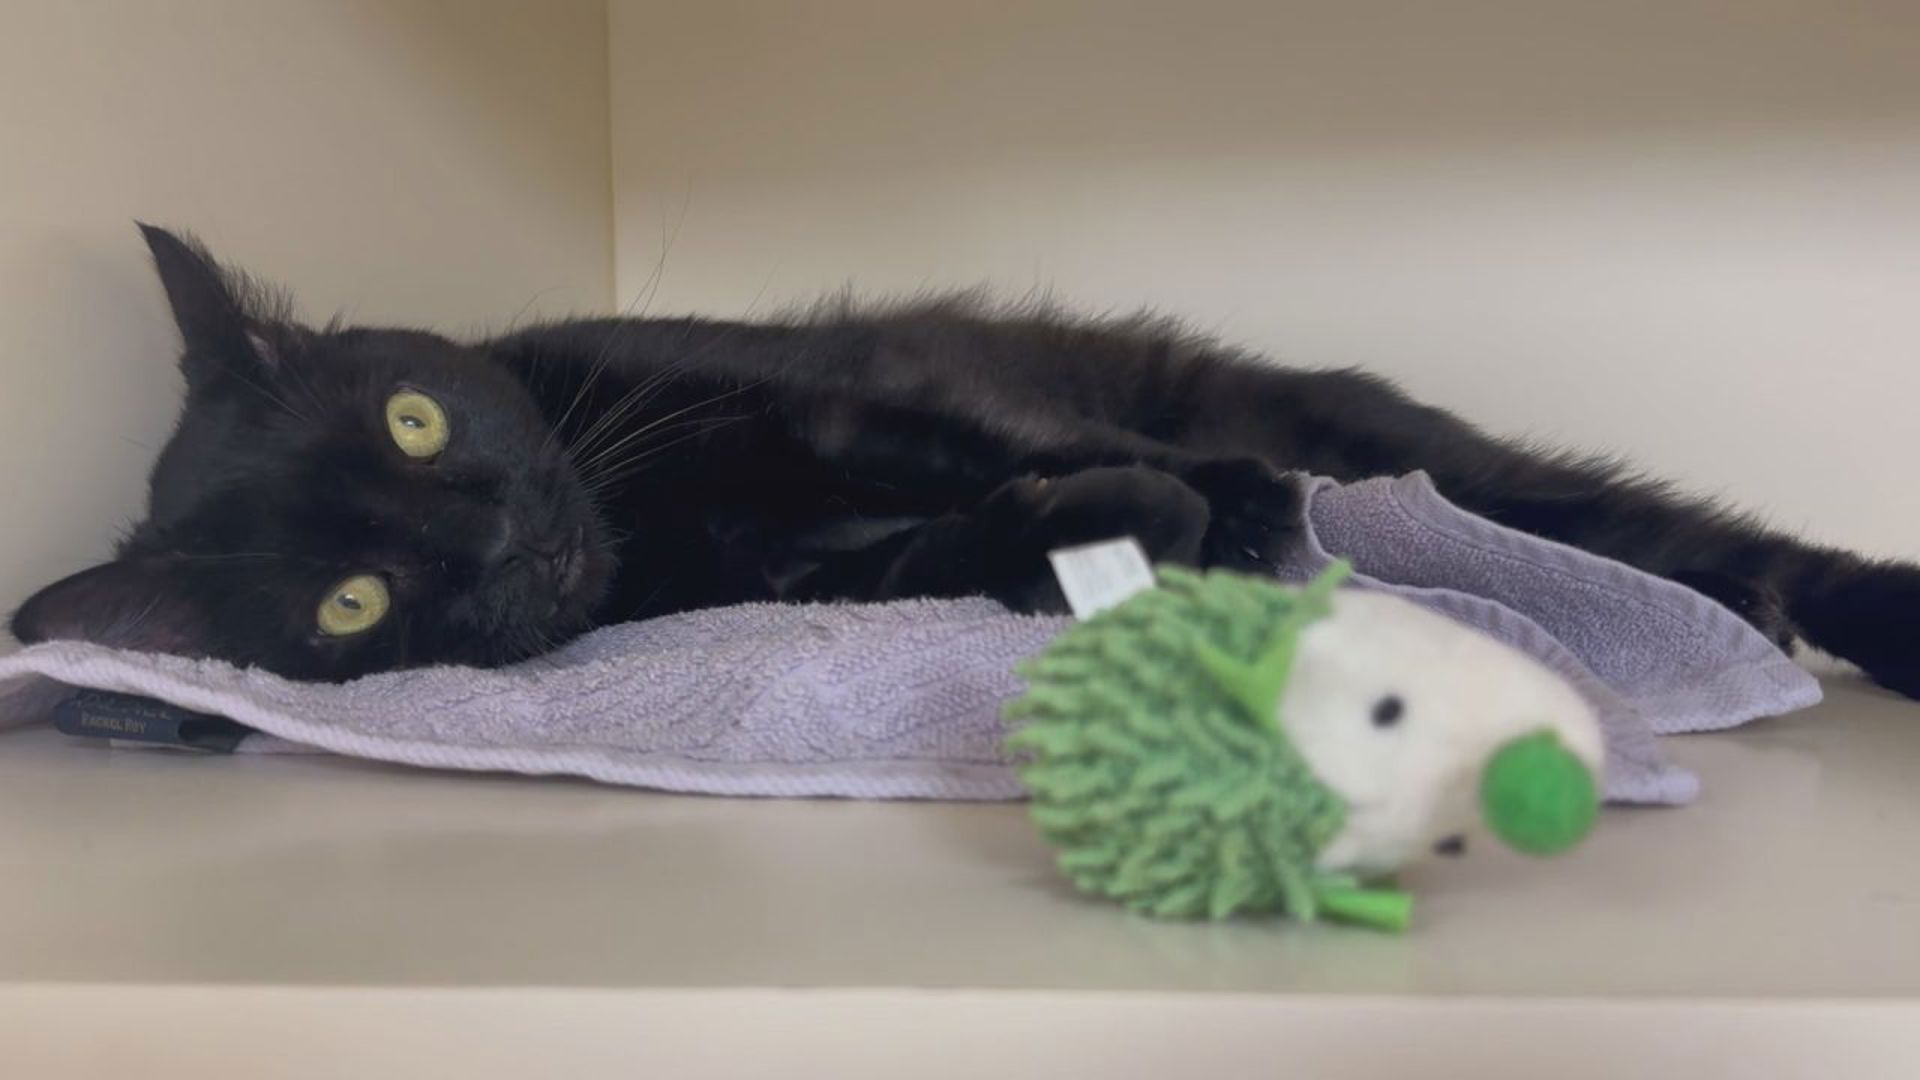 Louie is the longest resident at the Pet Pantry of Lancaster County. He's an outgoing 2-year-old cat who loves to play and snuggle with his people.